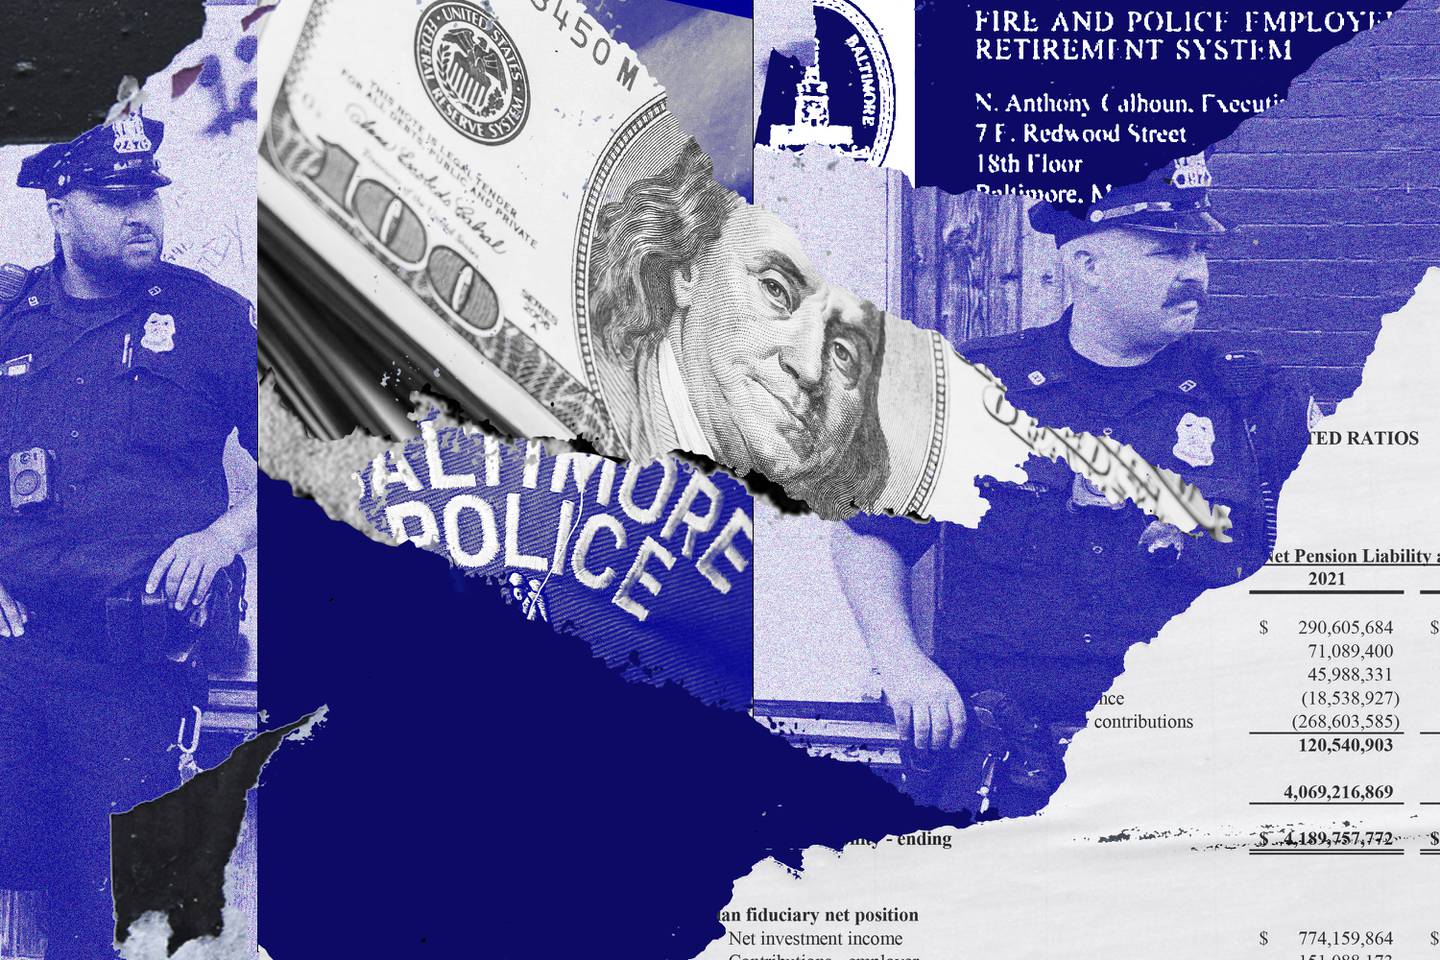 Police pension documents and Baltimore City police